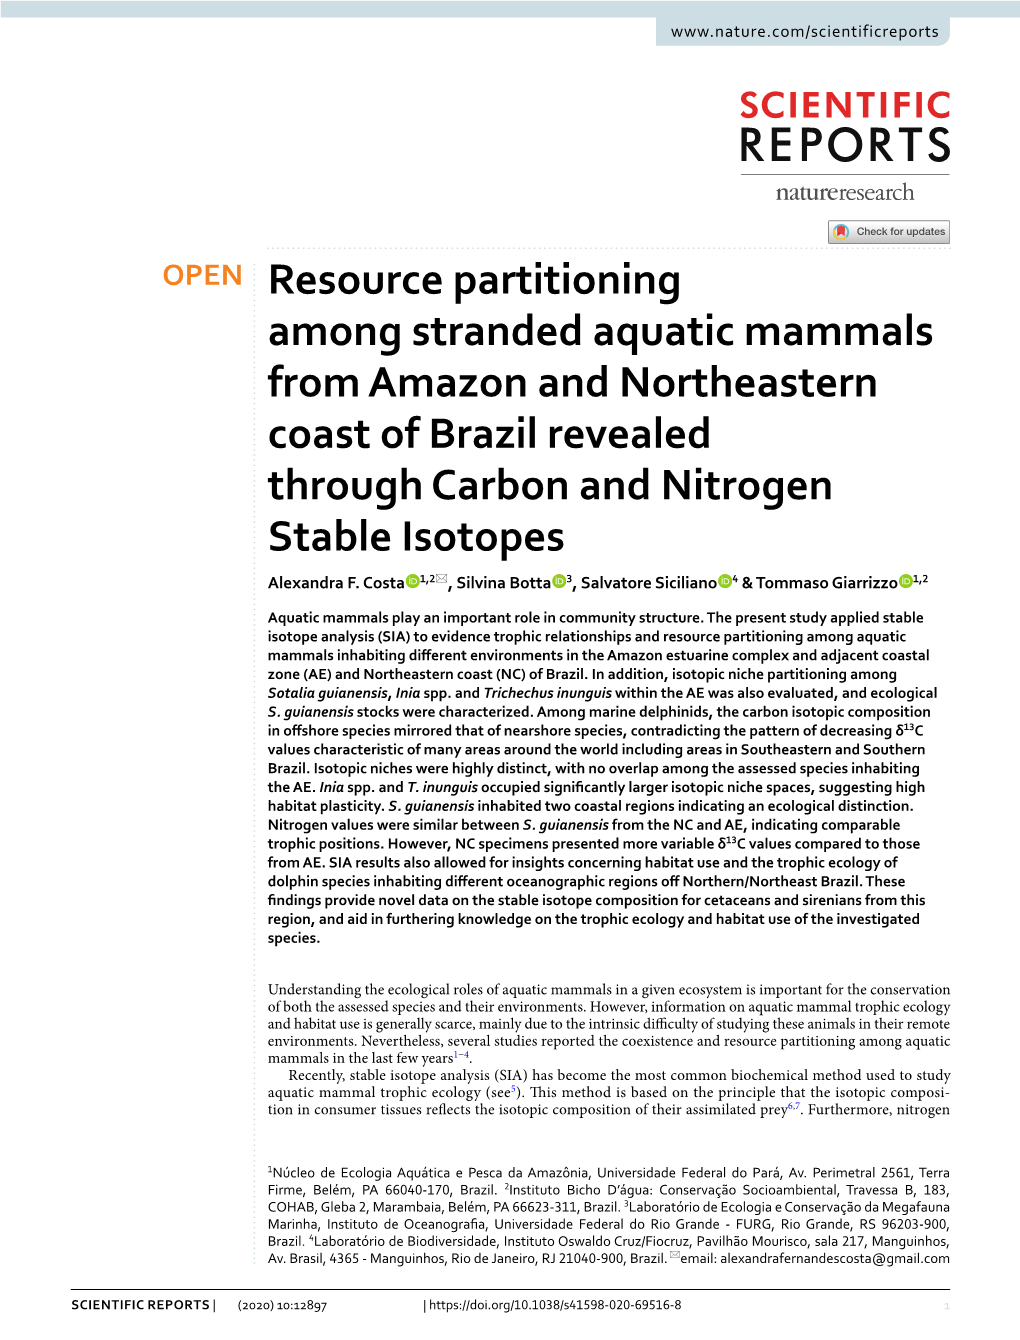 Resource Partitioning Among Stranded Aquatic Mammals from Amazon and Northeastern Coast of Brazil Revealed Through Carbon and Nitrogen Stable Isotopes Alexandra F